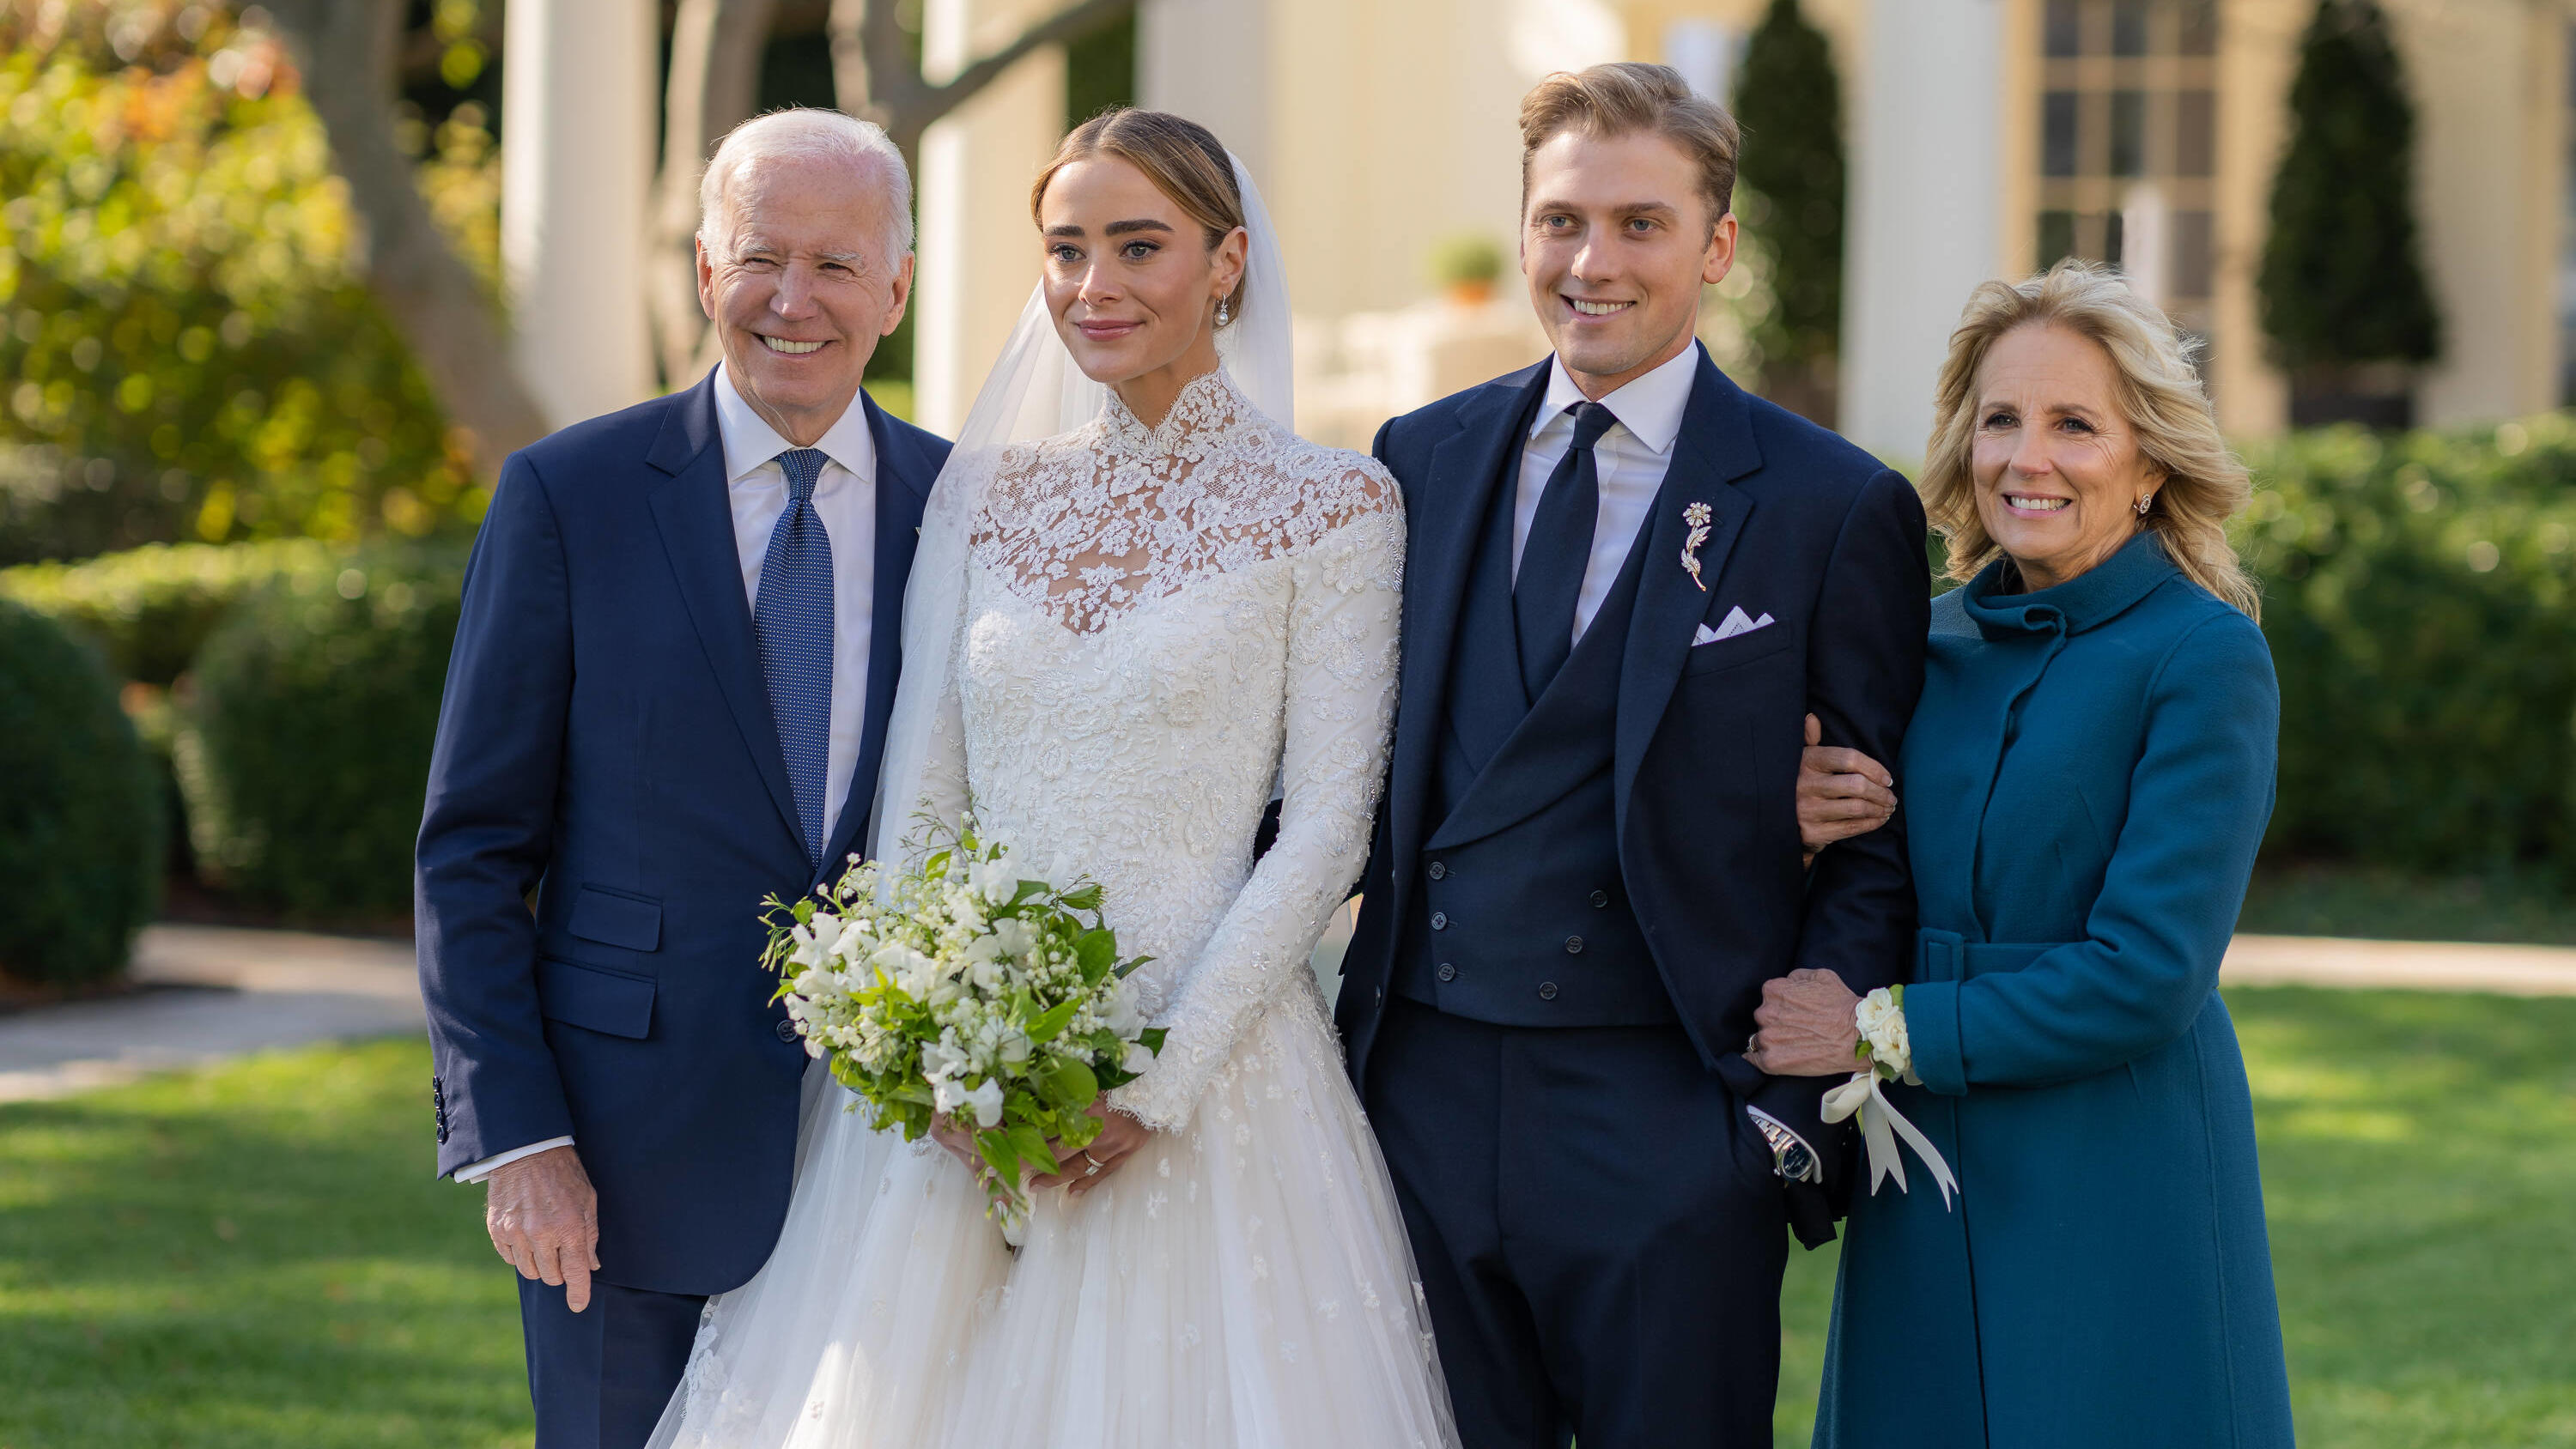  November 19, 2022, Washington, District of Columbia, USA: United States President Joe Biden and first lady Dr. Jill Biden attend the wedding of Peter Neal and Naomi Biden Neal, Saturday, November 19, 2022 on the South Lawn of the White House in Wash